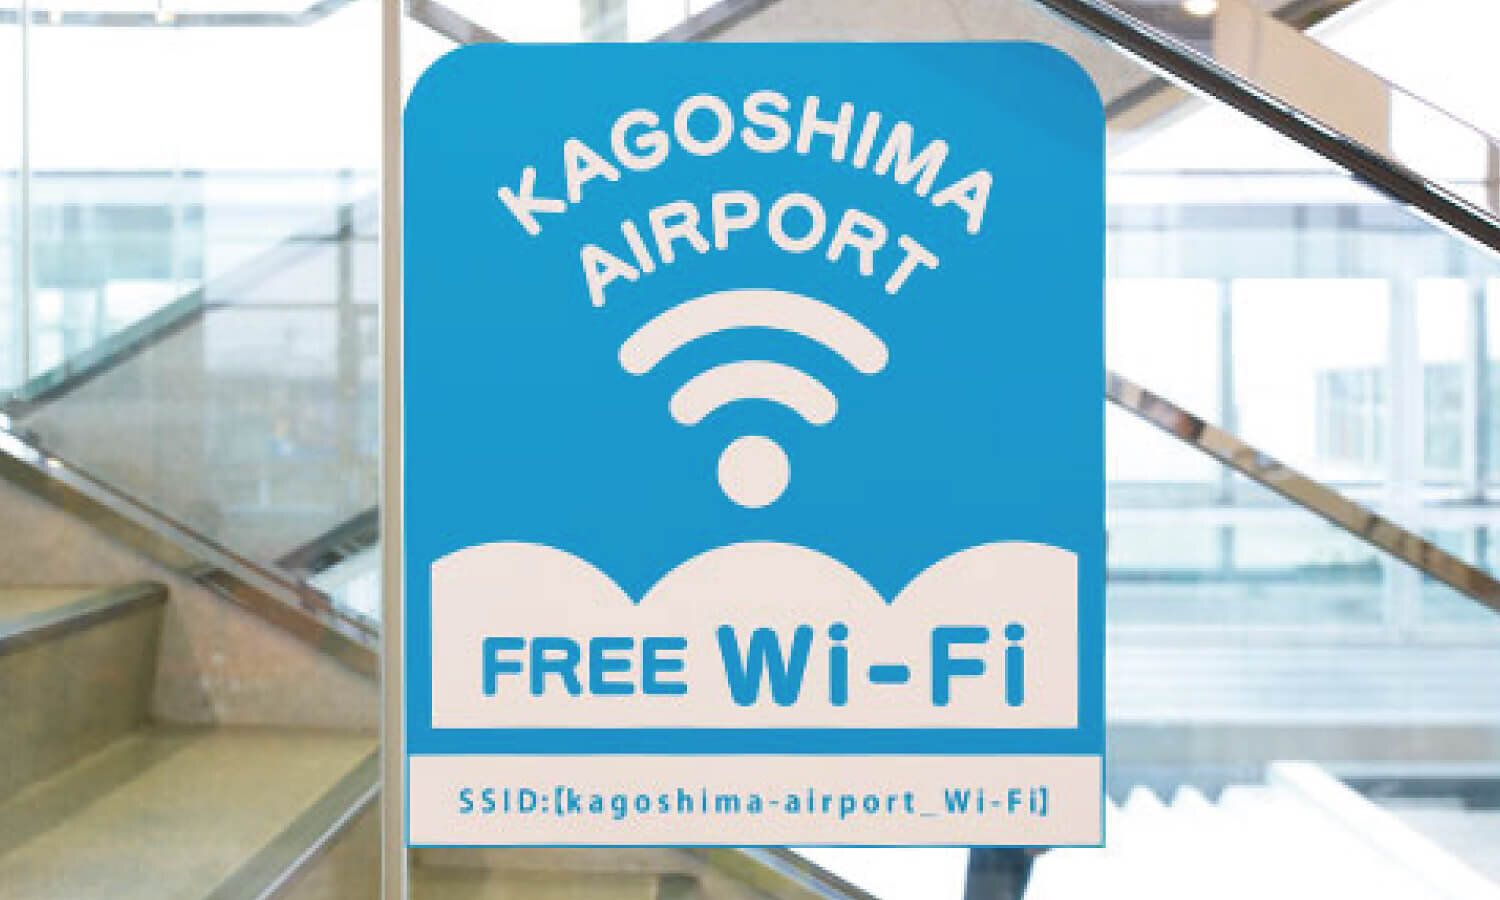 Free public wireless LAN internet（available throughout the terminal ）